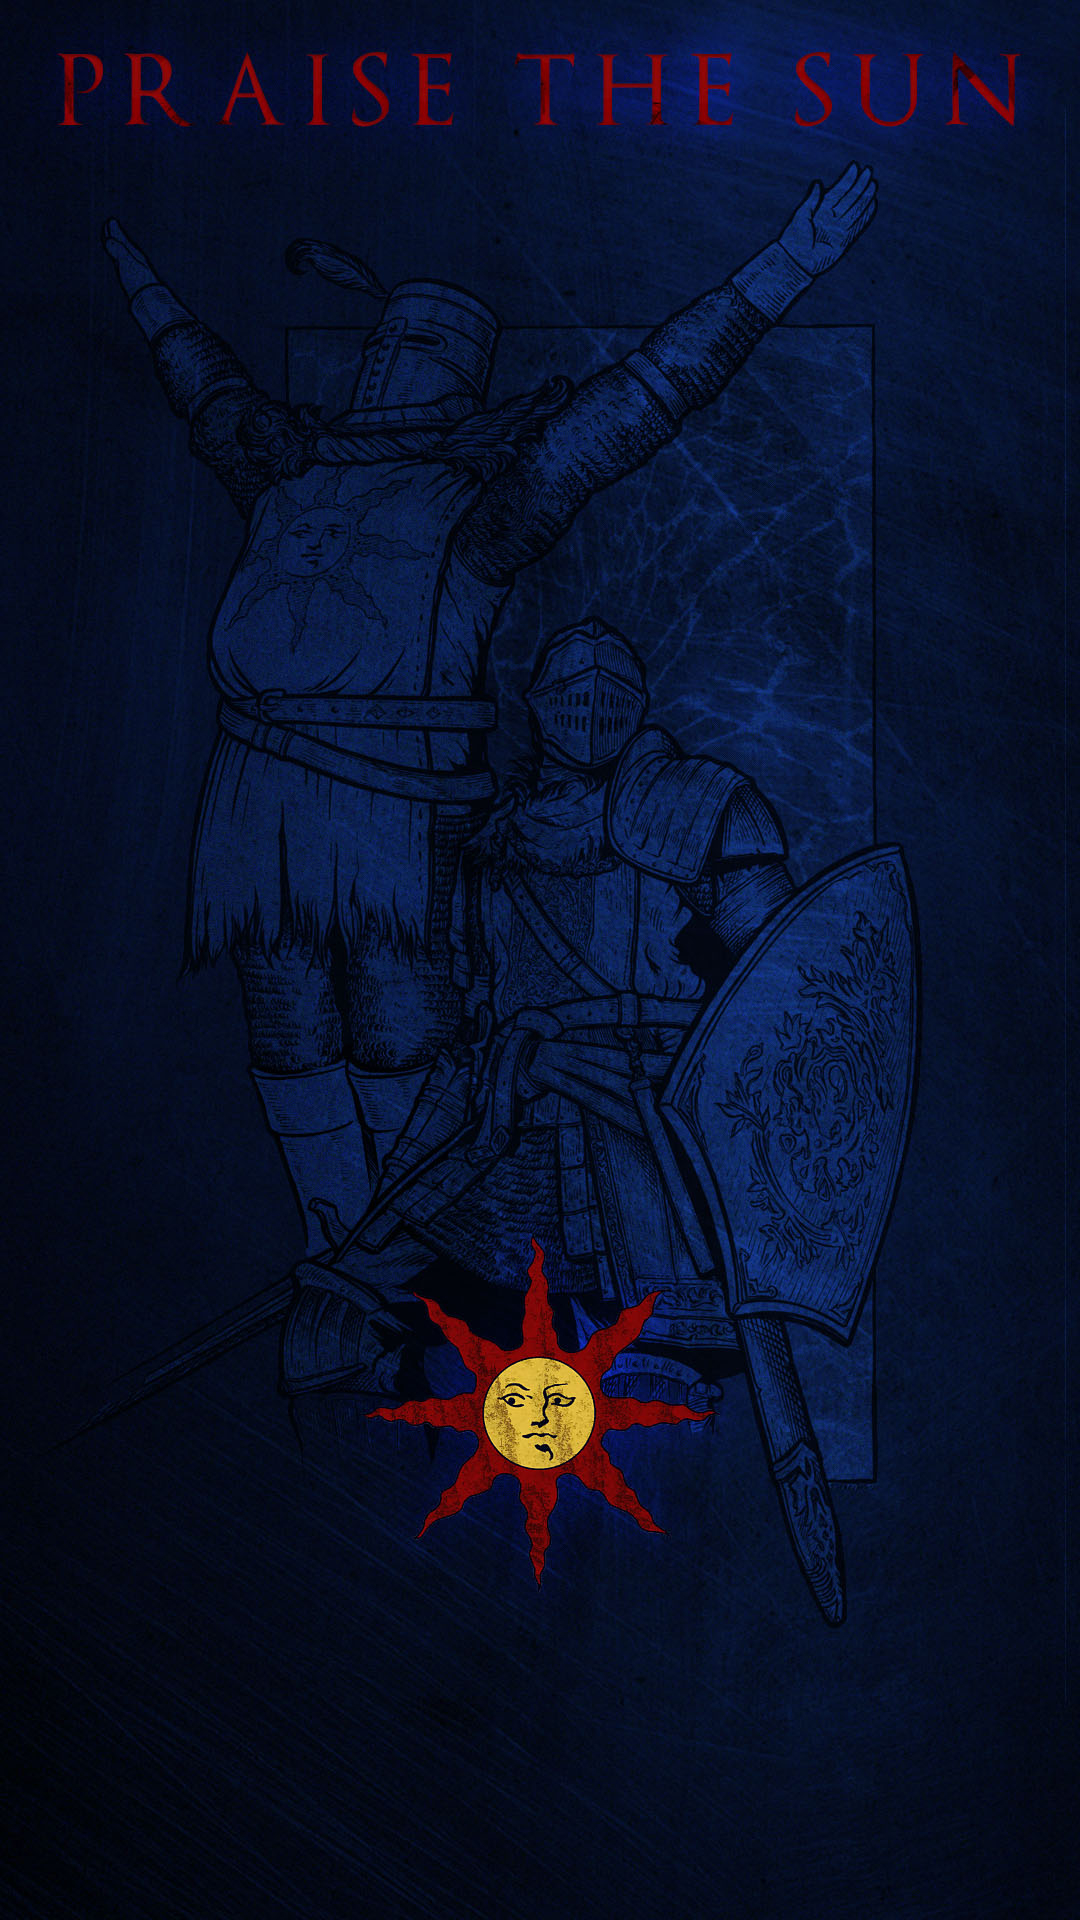 1080x1920 I have edited some phone wallpapers */ Solaire \u0026 Praise the sun /* : r/darksouls